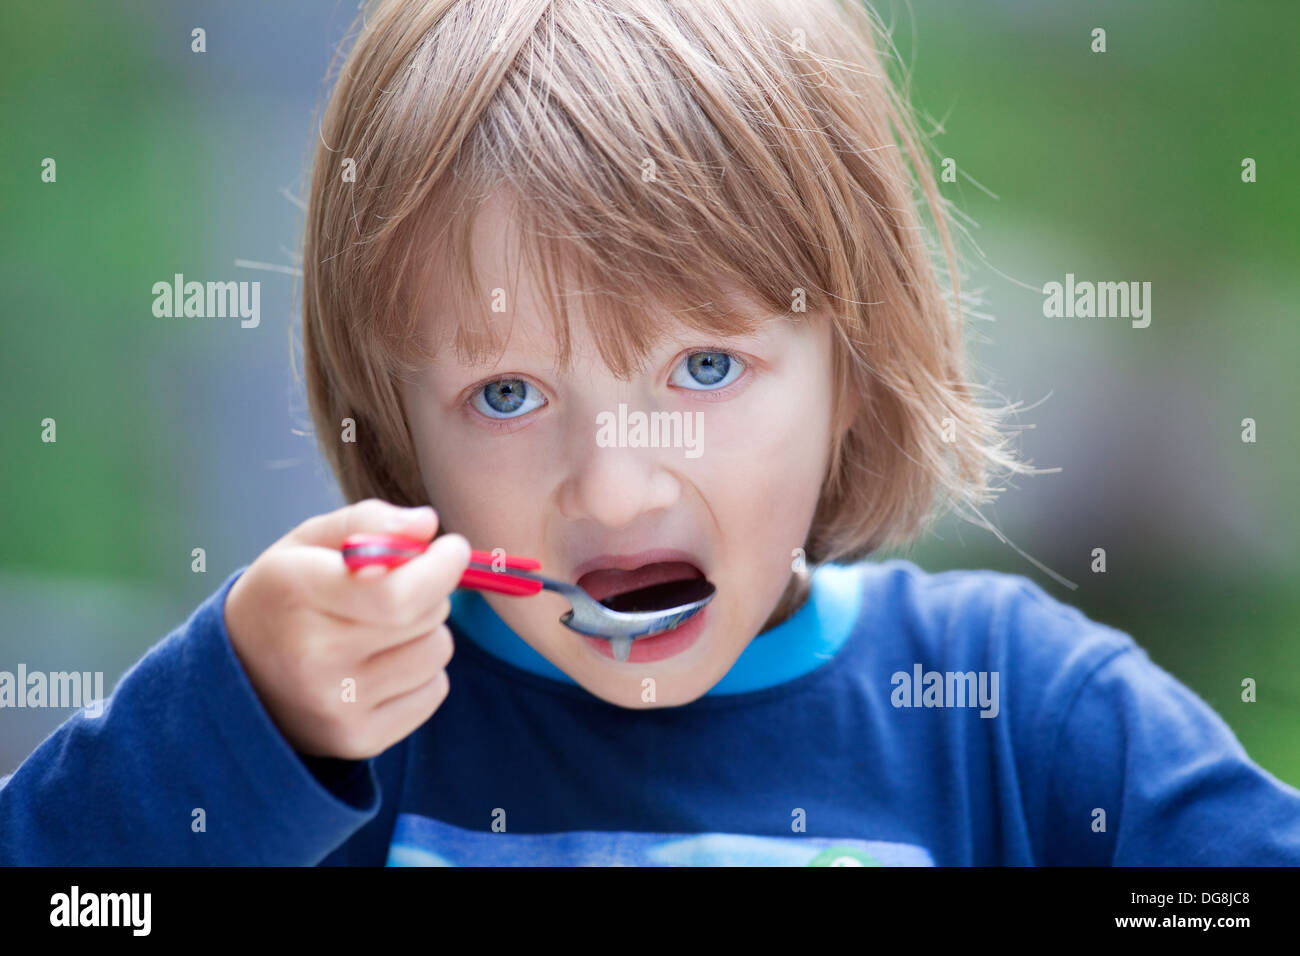 Boy with Blond Hair Eating Soup Stock Photo